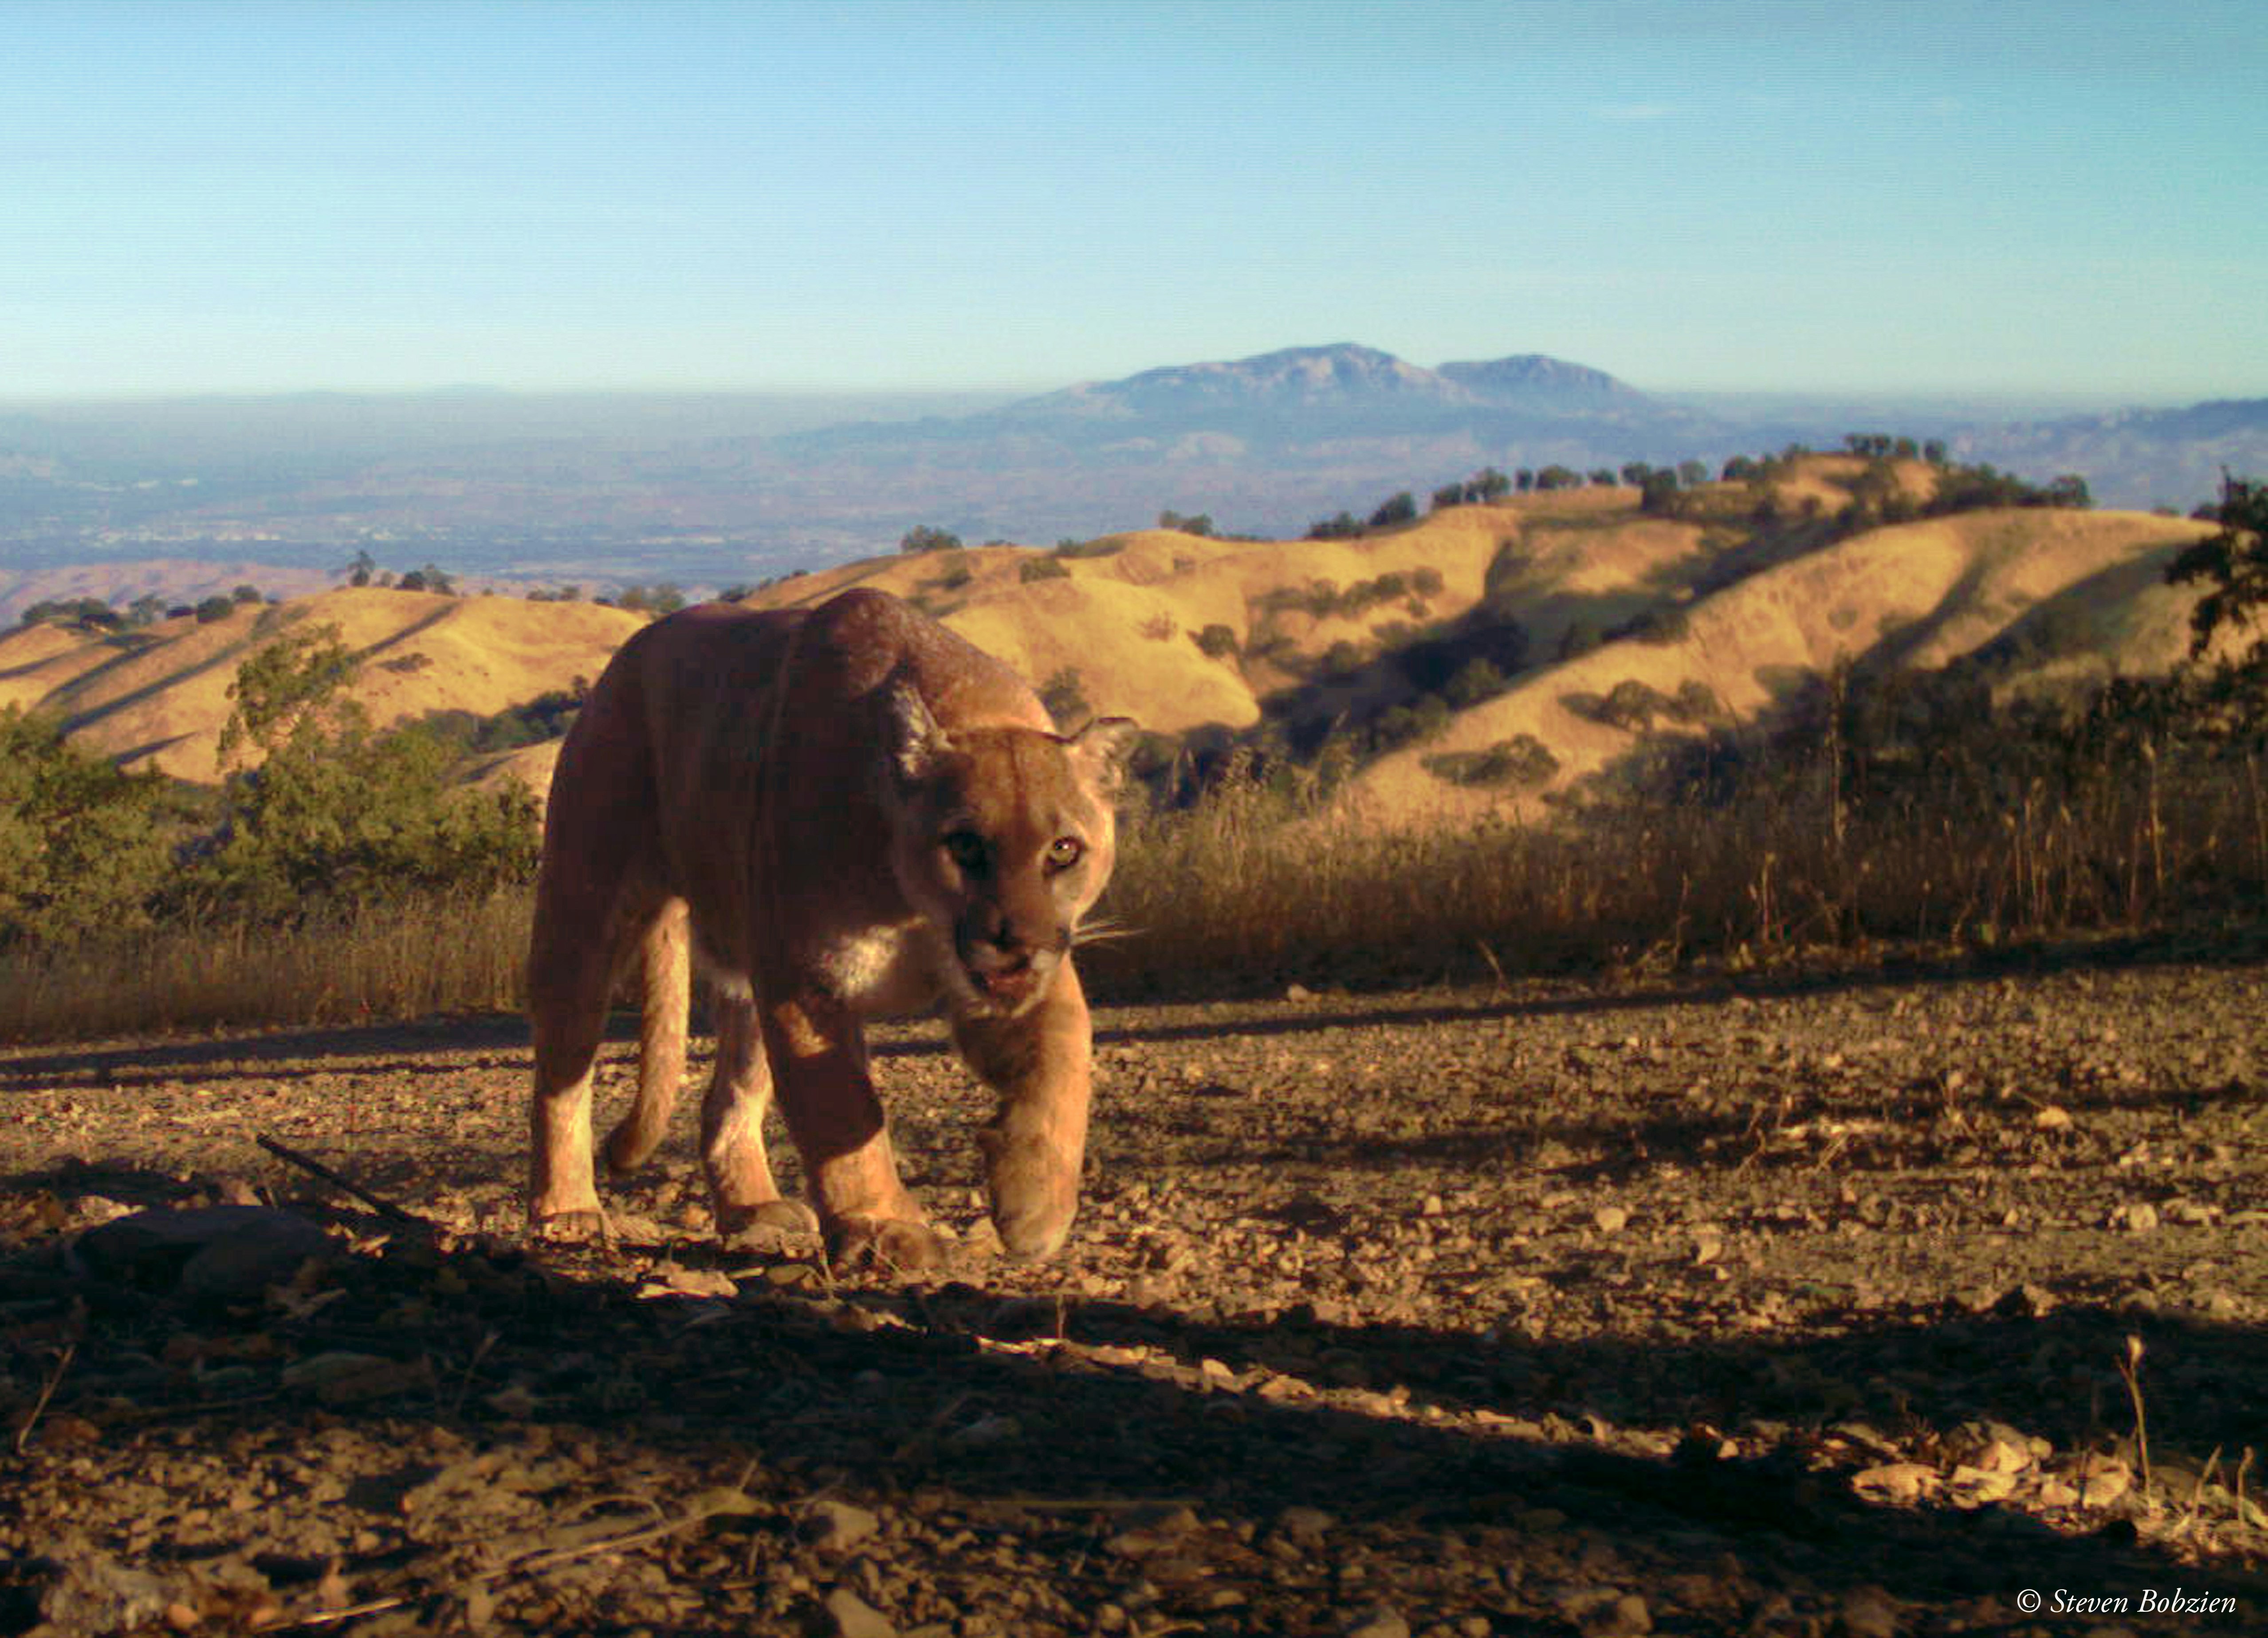 An adult male puma walking toward the camera with Mt Diablo in background